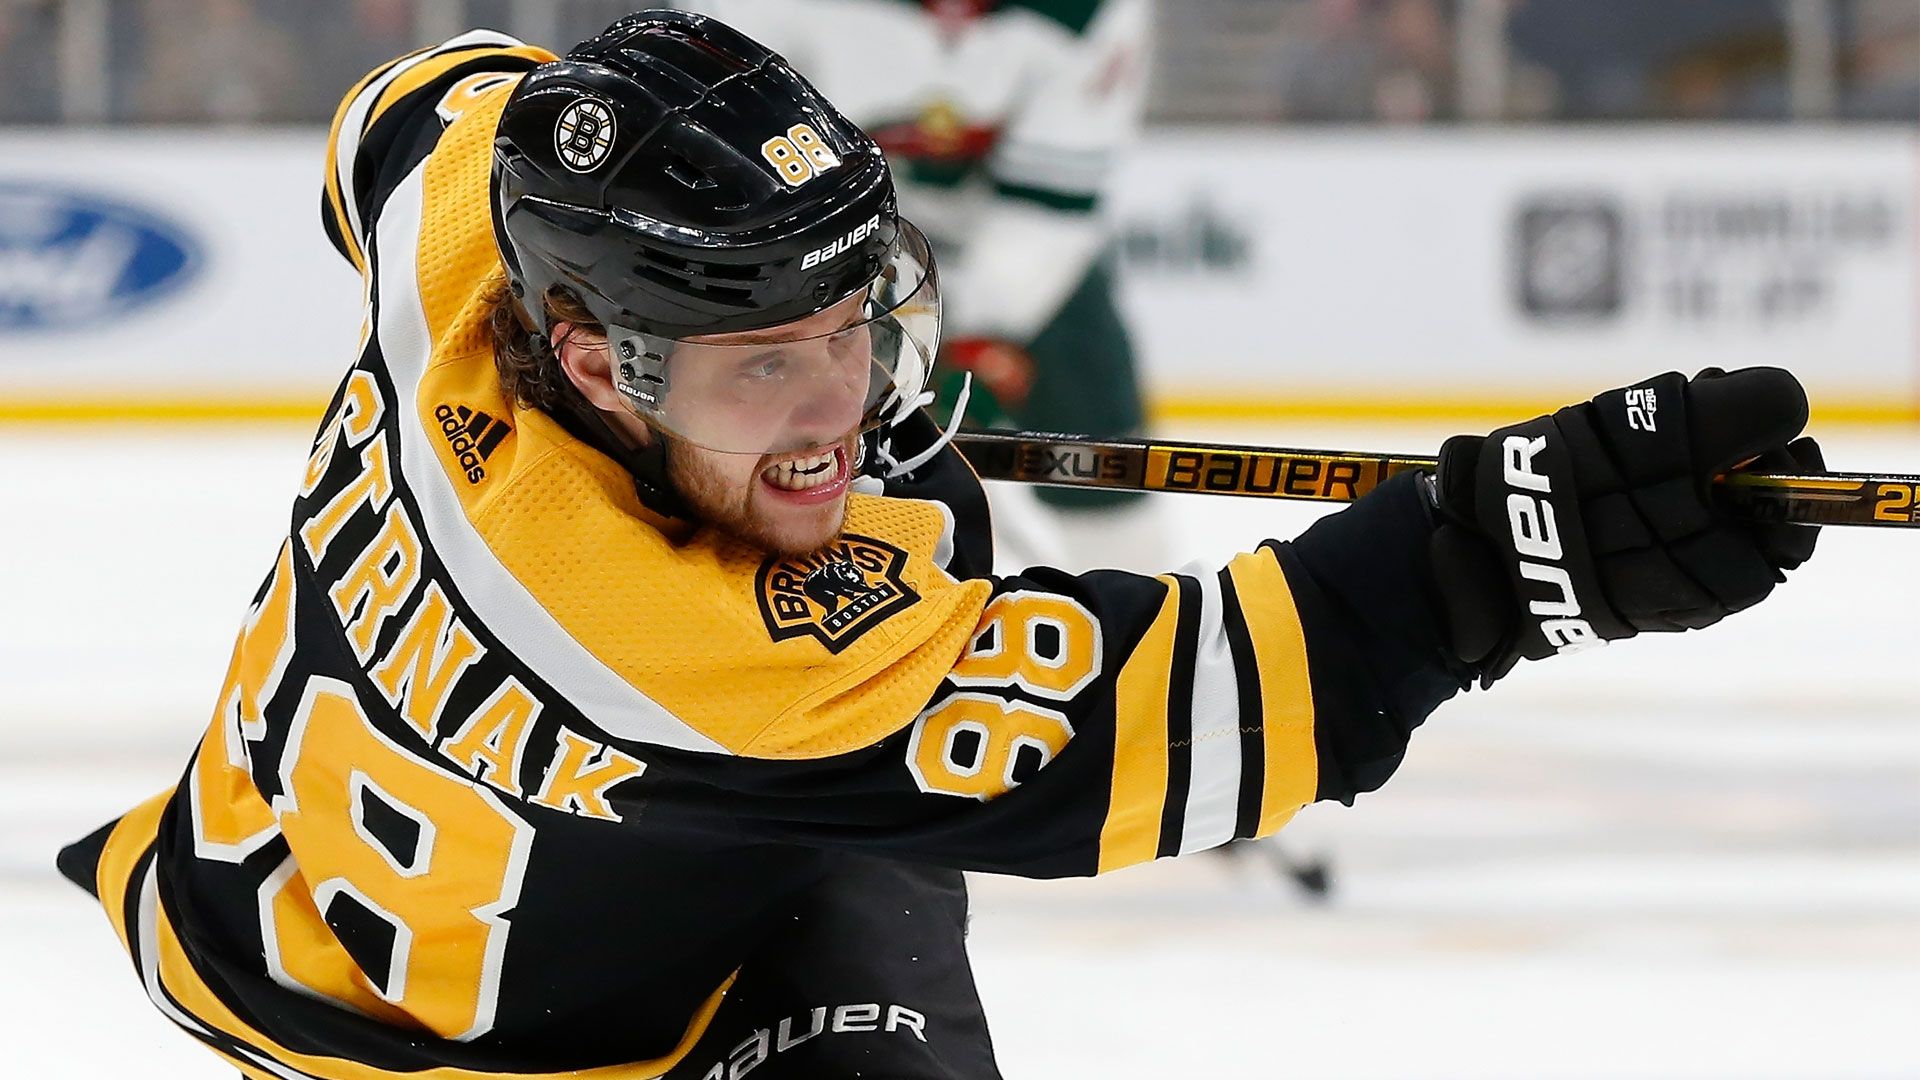 Is David Pastrnak now the NHL's most marketable player? DGB